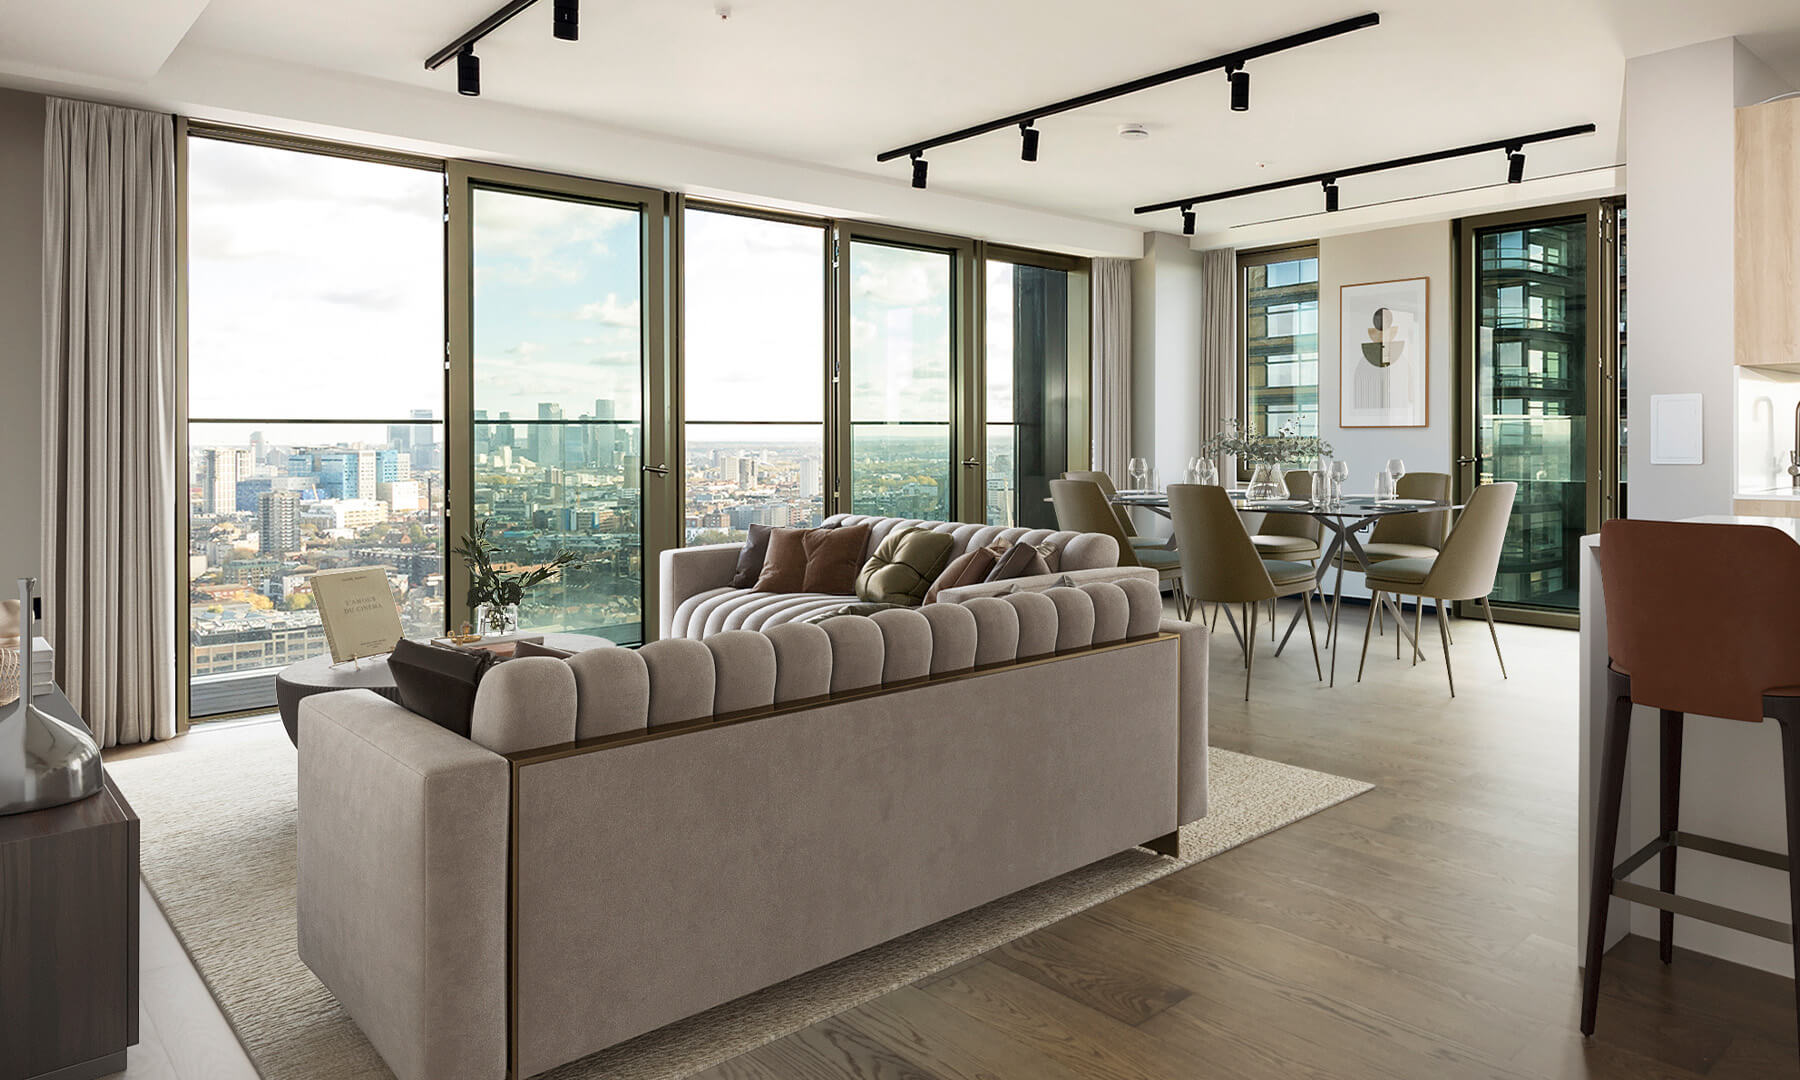 Living area at The Stage, ©Galliard Homes.